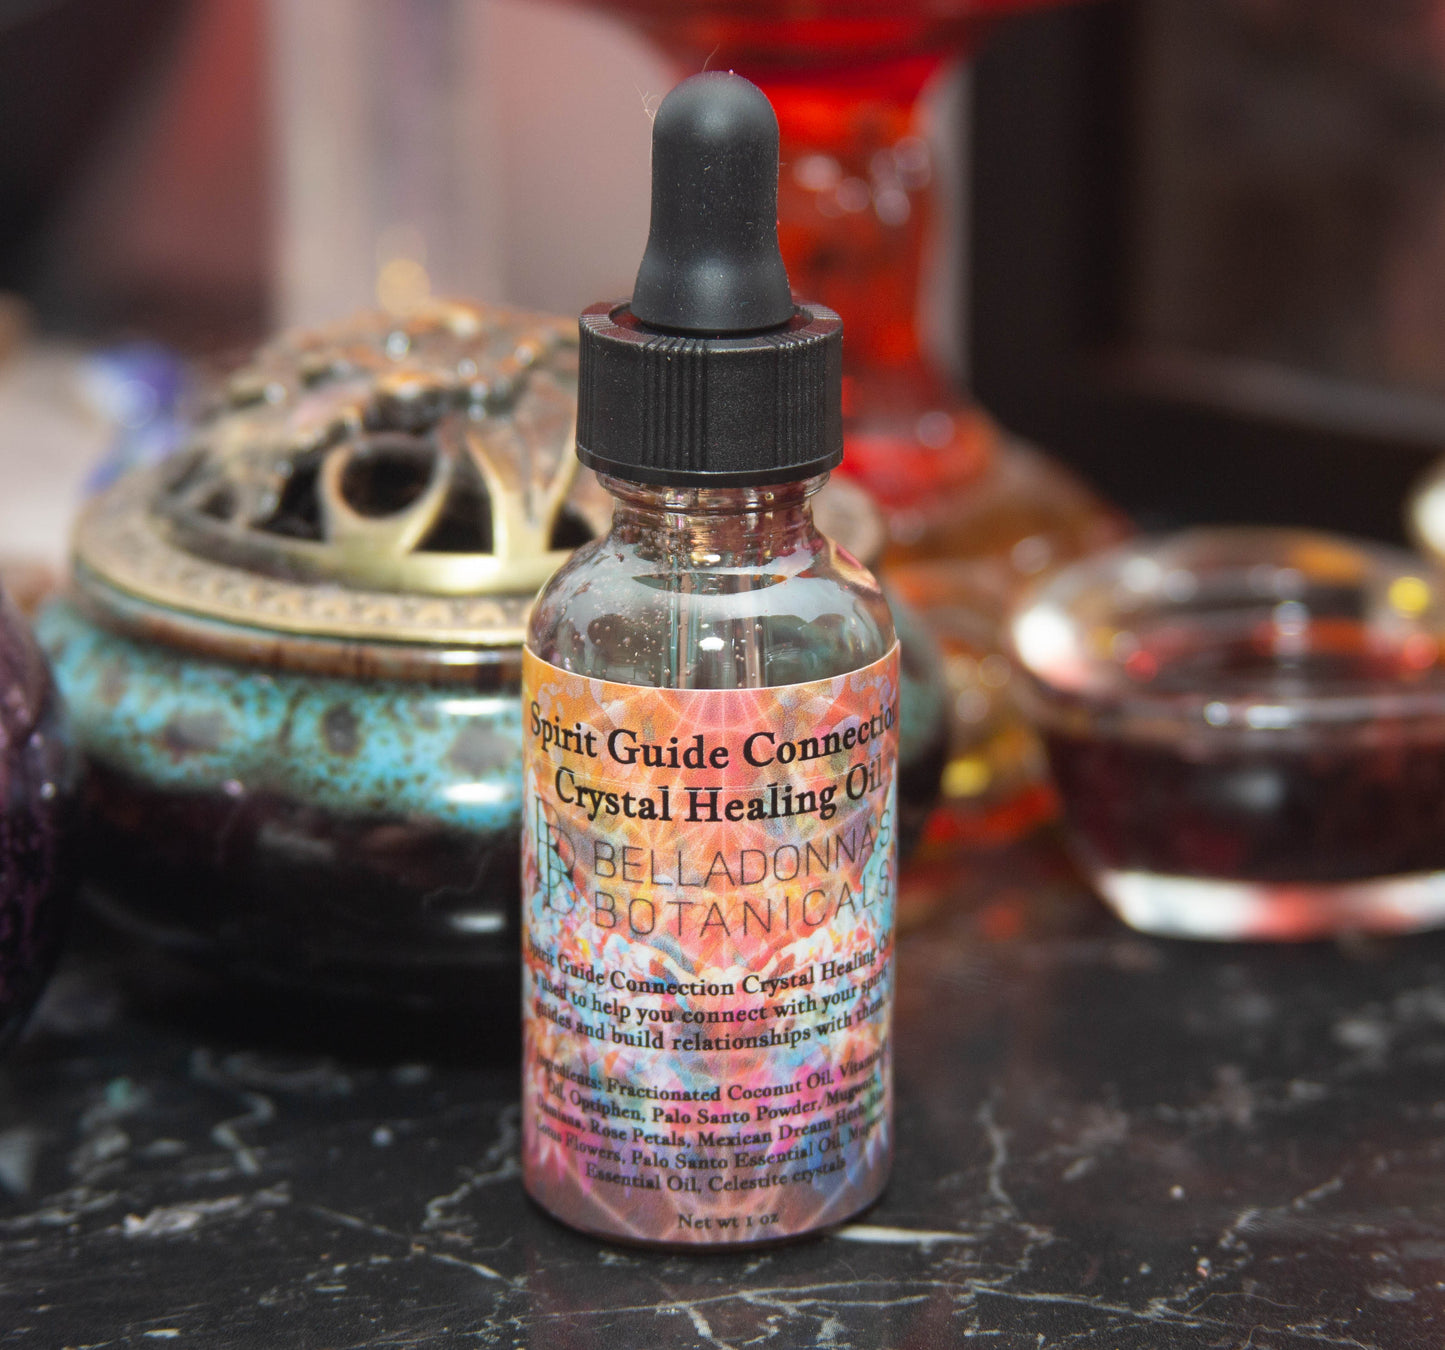 Spirit Guide Connection Crystal Healing Oil